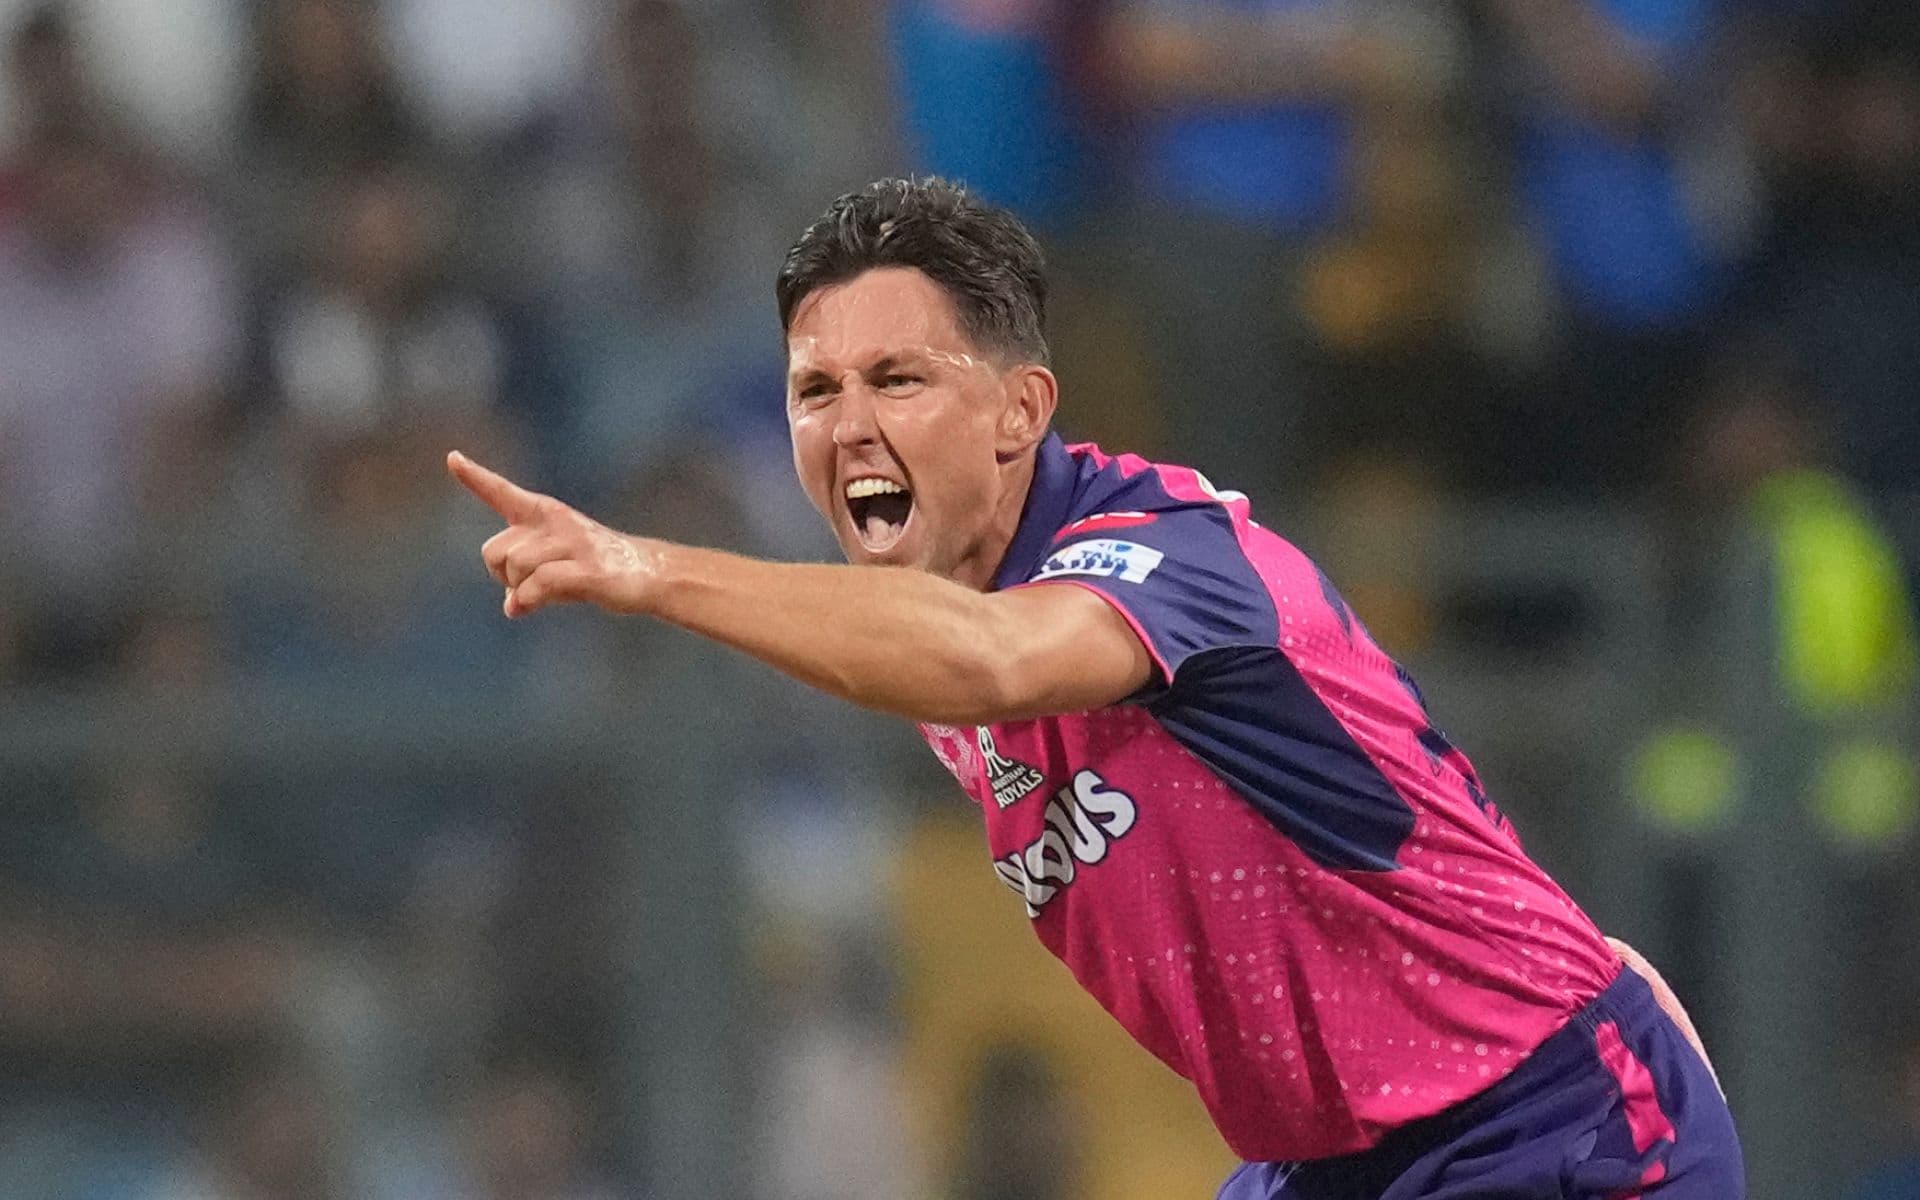 Trent Boult could be crucial for the Royals in this game [AP Photos]